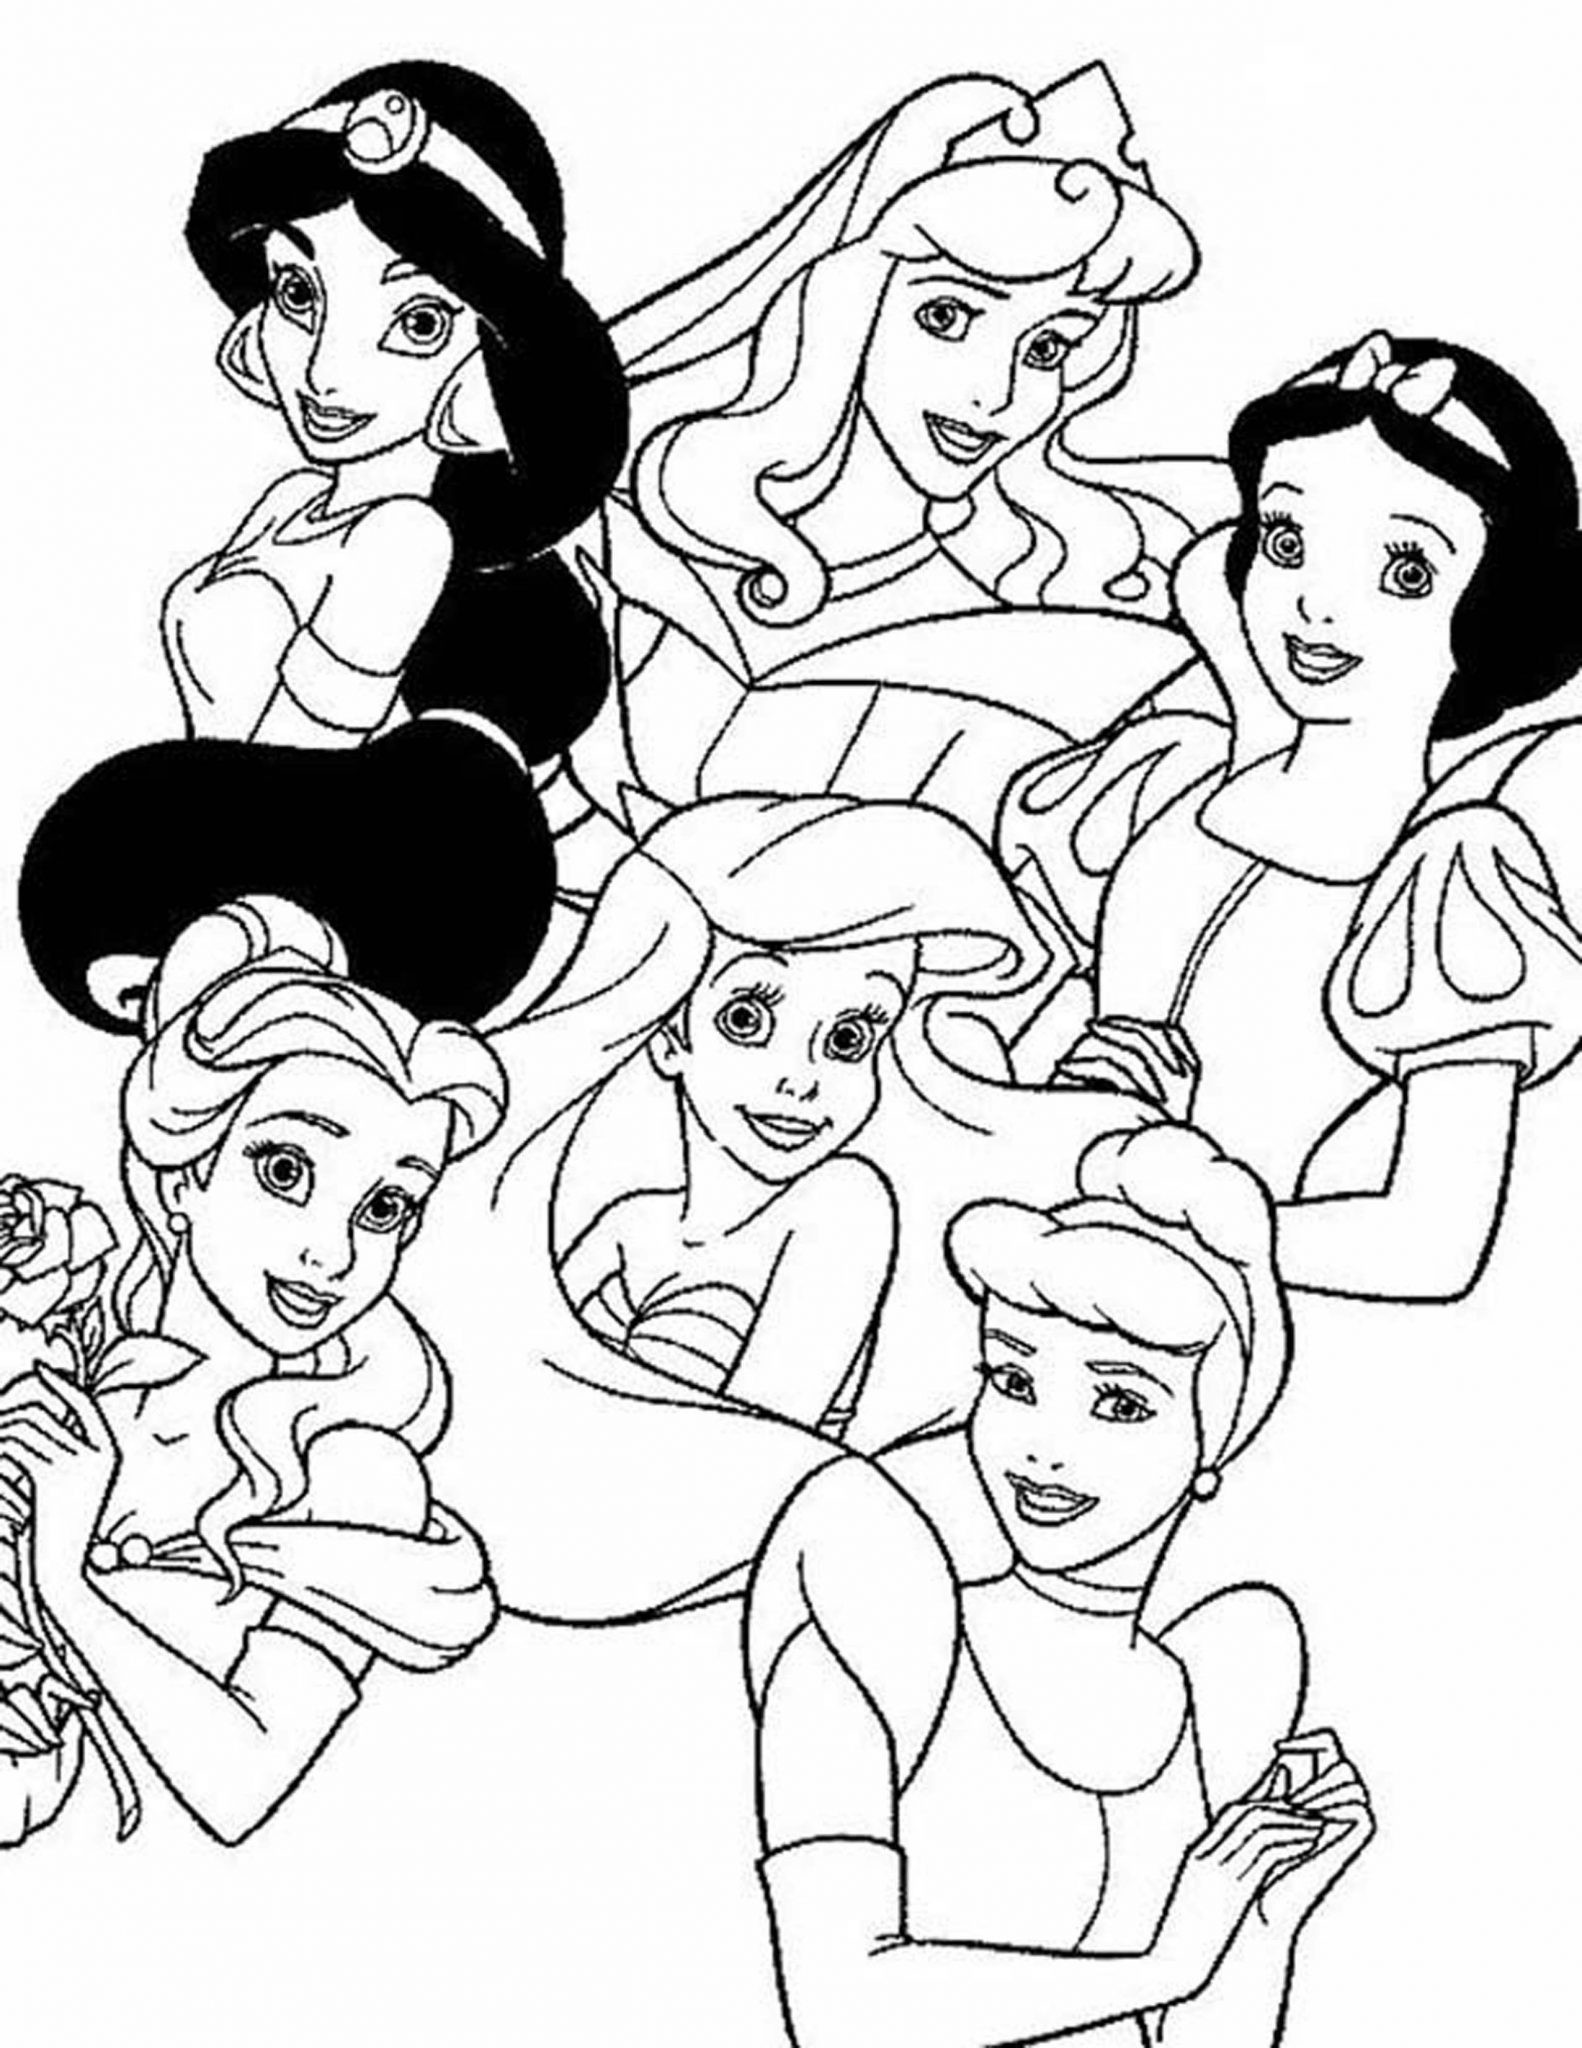 Disney Coloring Pages For Kids
 Disney Coloring Pages For Your Children